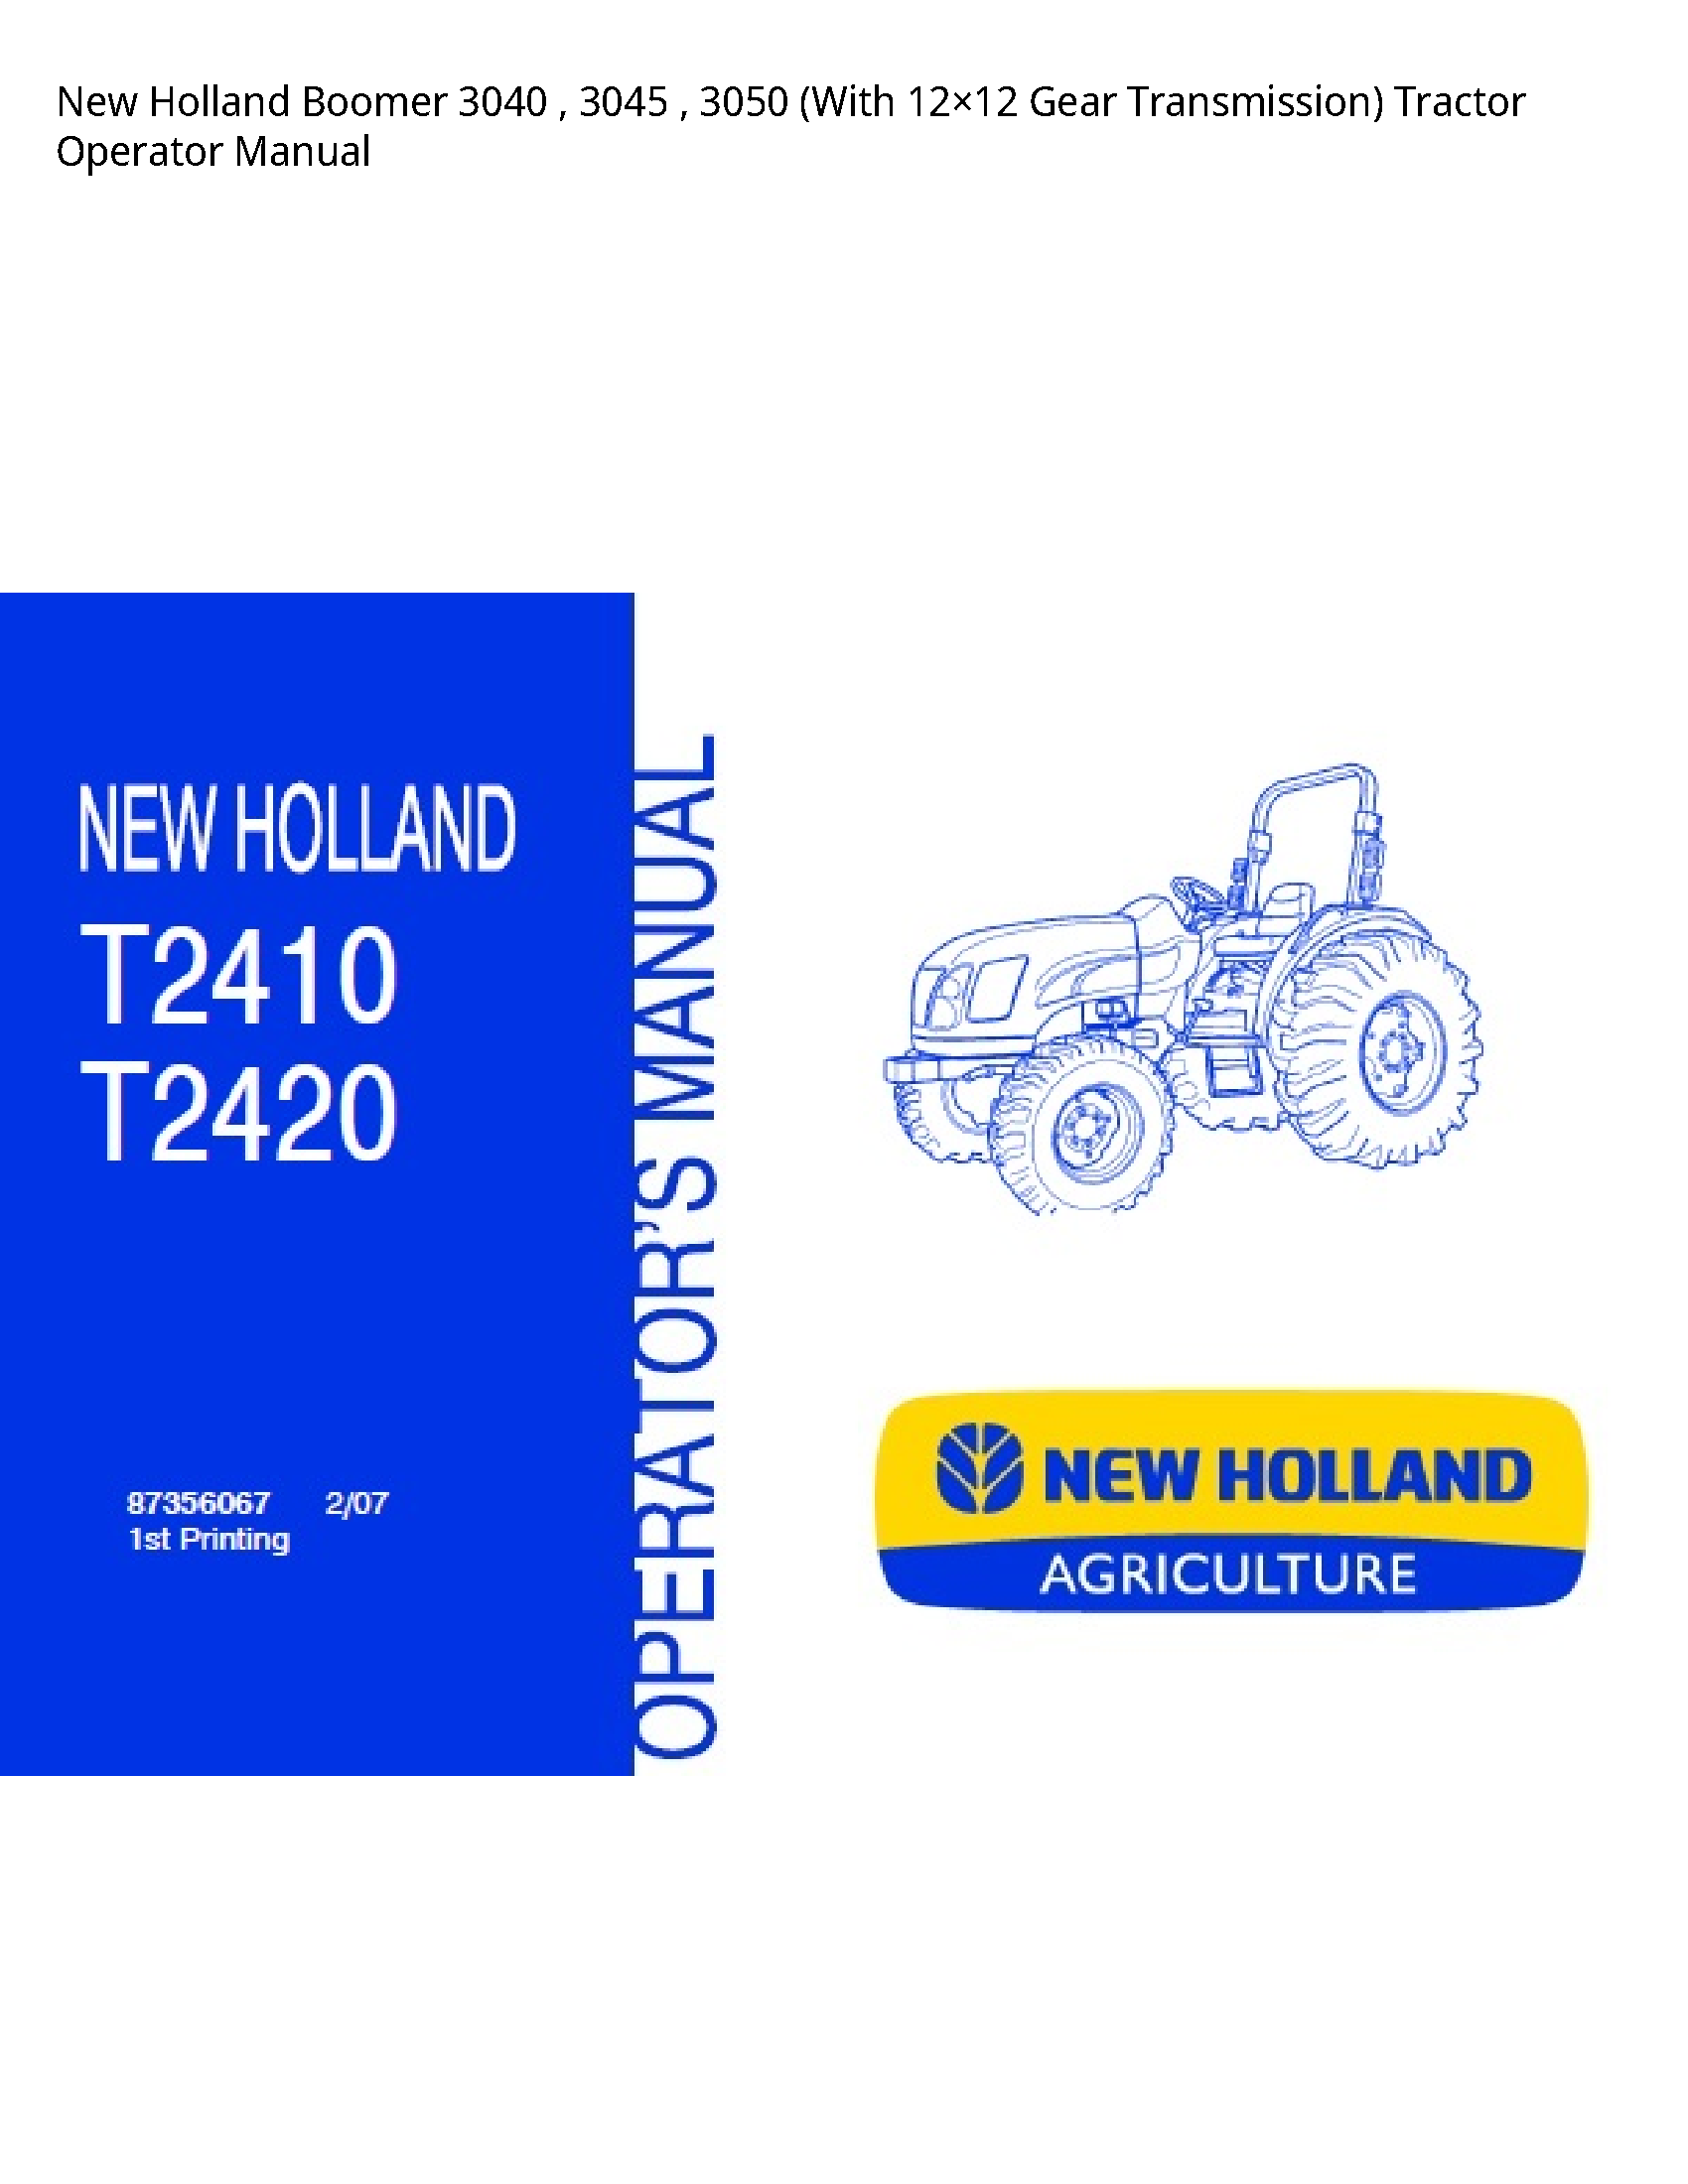 New Holland 3040 Boomer (With Gear Transmission) Tractor Operator manual